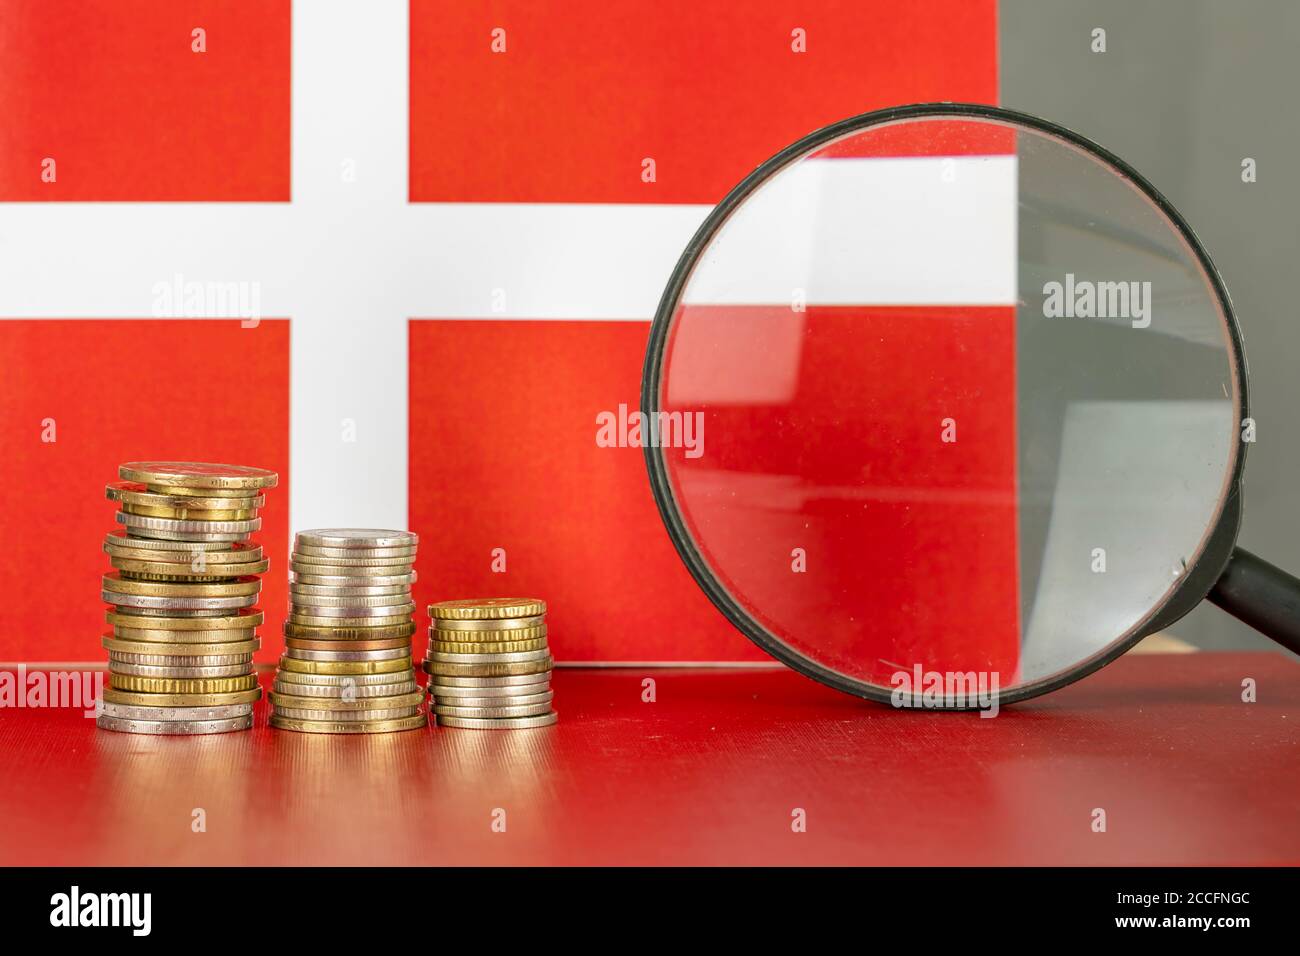 Magnifying glass and coins in front of Denmark flag, country economy concept Stock Photo